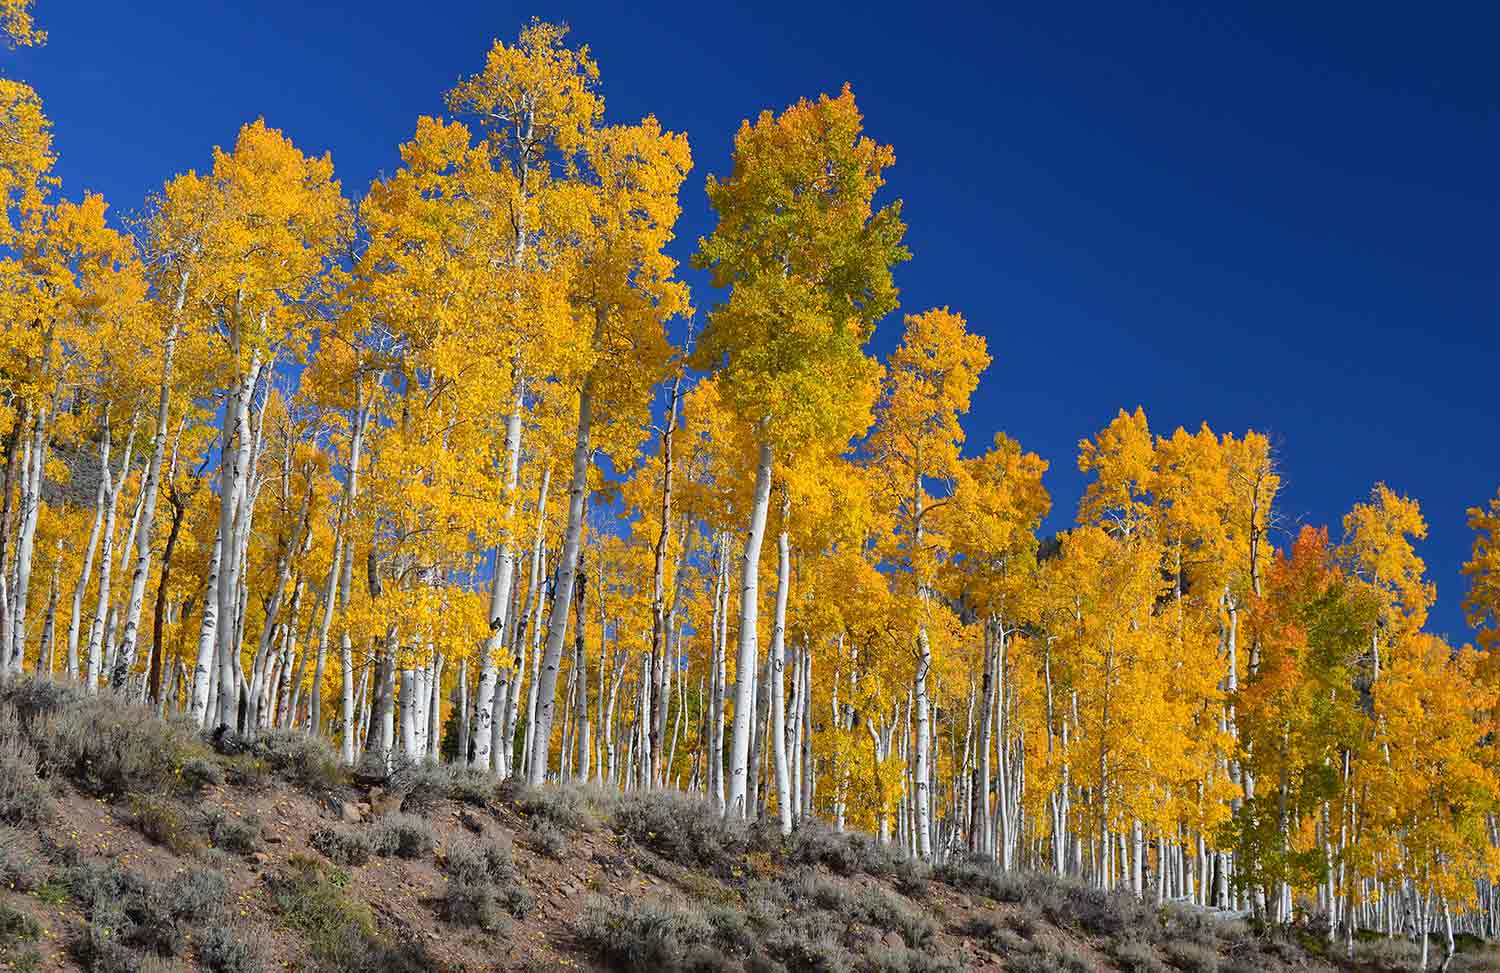 The Pando clone made up of clones of trees in fall colors.